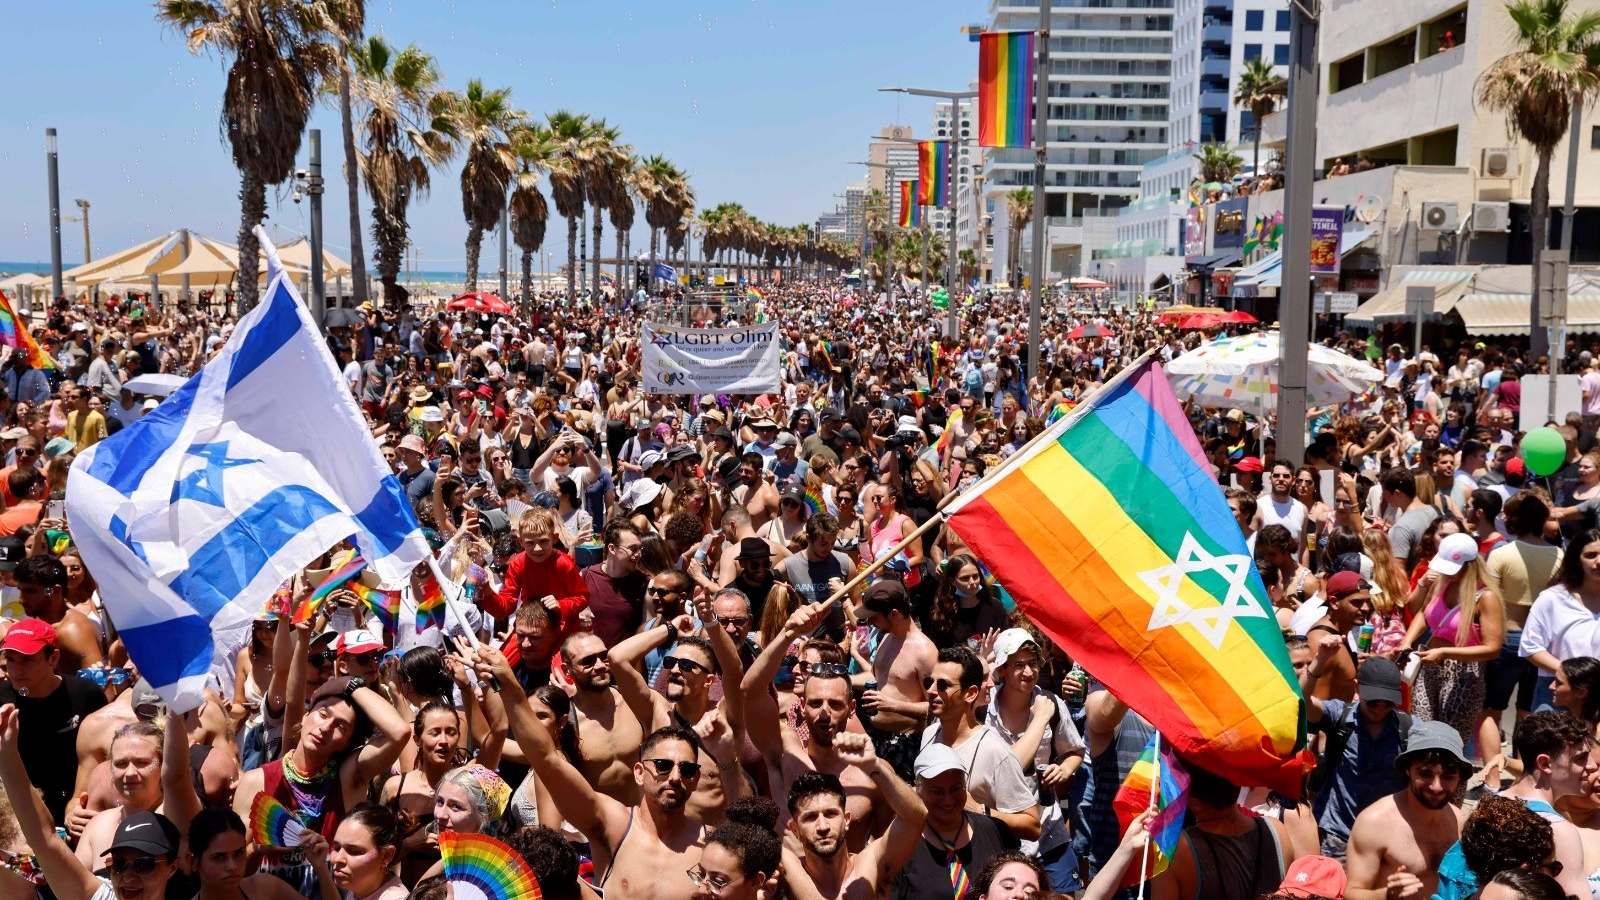 Tens of thousands expected at Tel Aviv Pride Month events ISRAEL21c